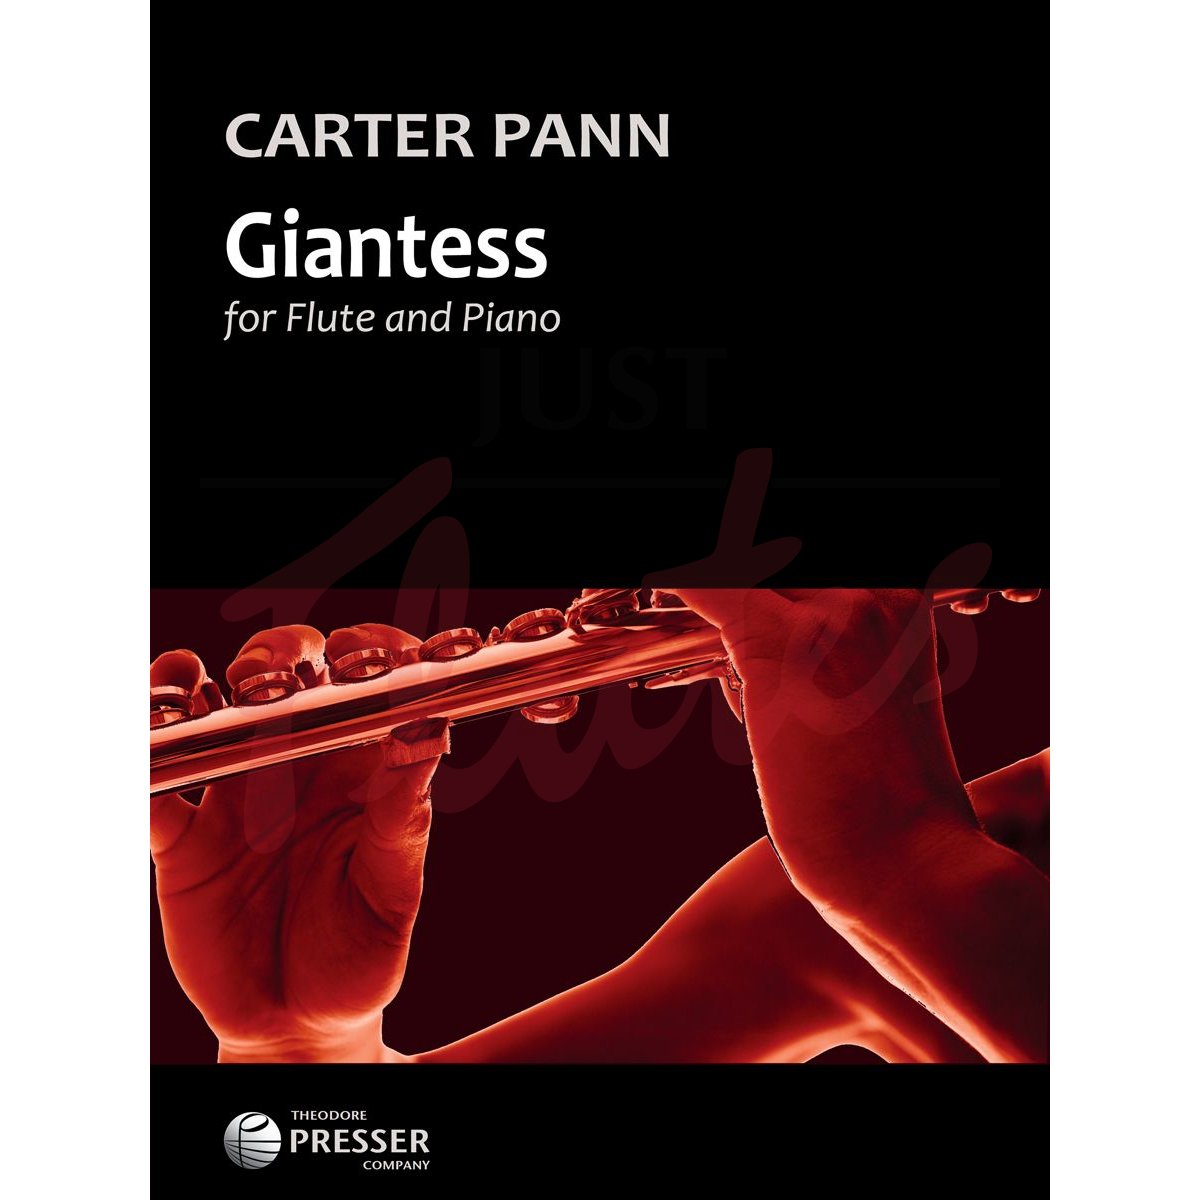 Giantess for Flute and Piano